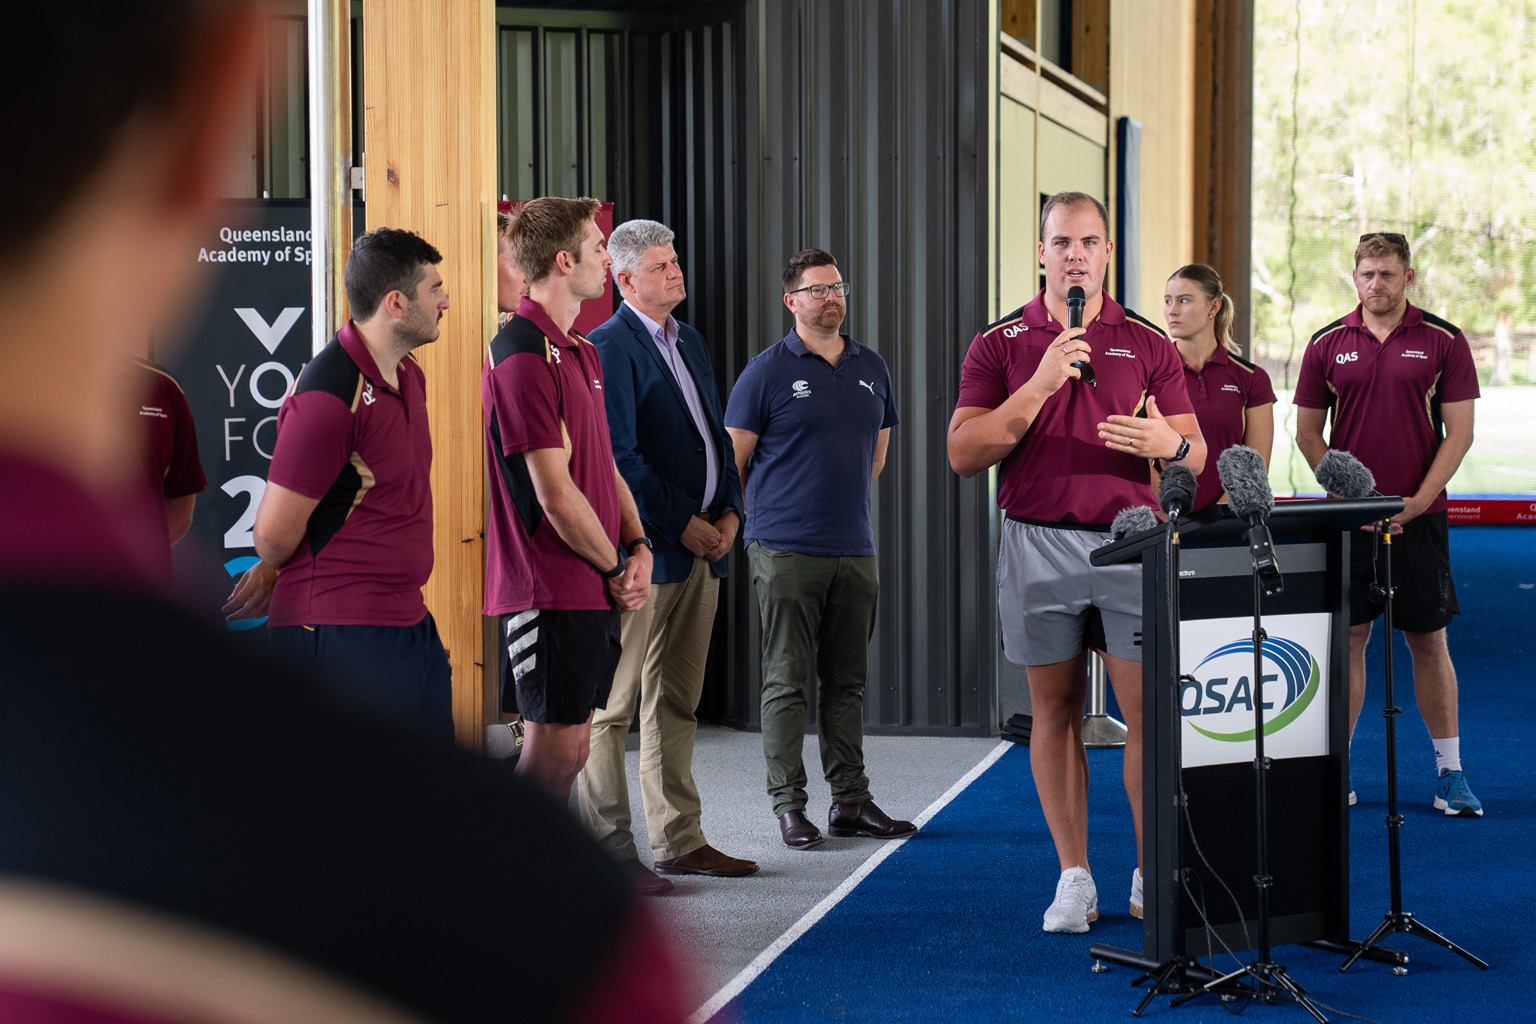 A group of people gathered wearing Queensland Academy of Sport shirts